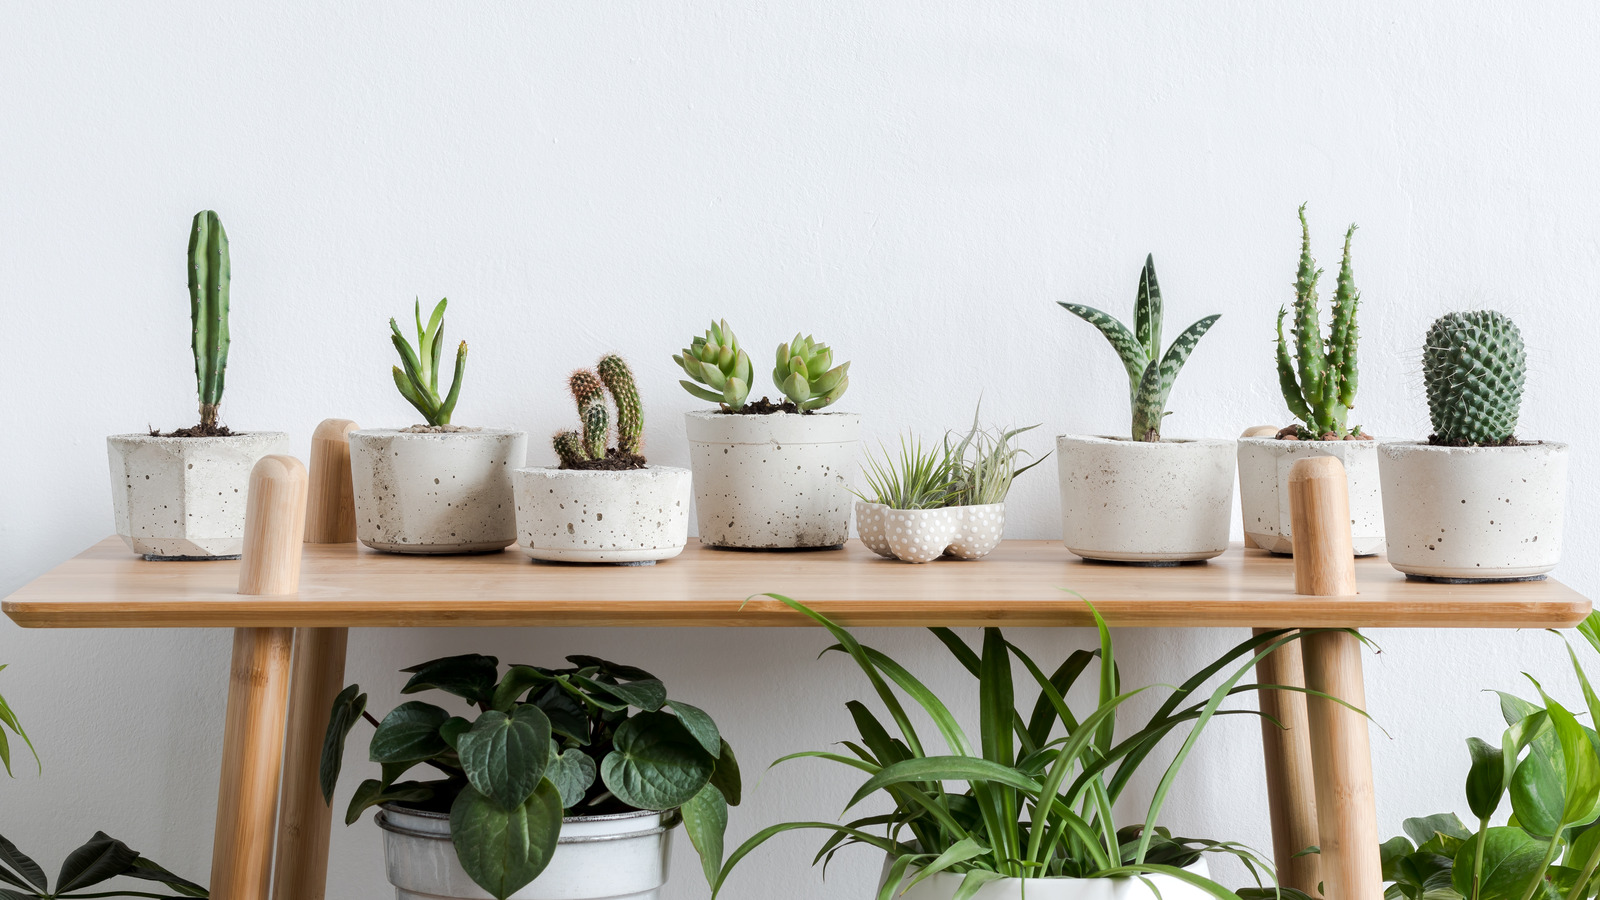 https://www.housedigest.com/img/gallery/transform-cheap-plastic-pots-into-chic-cement-planters/l-intro-1691427235.jpg